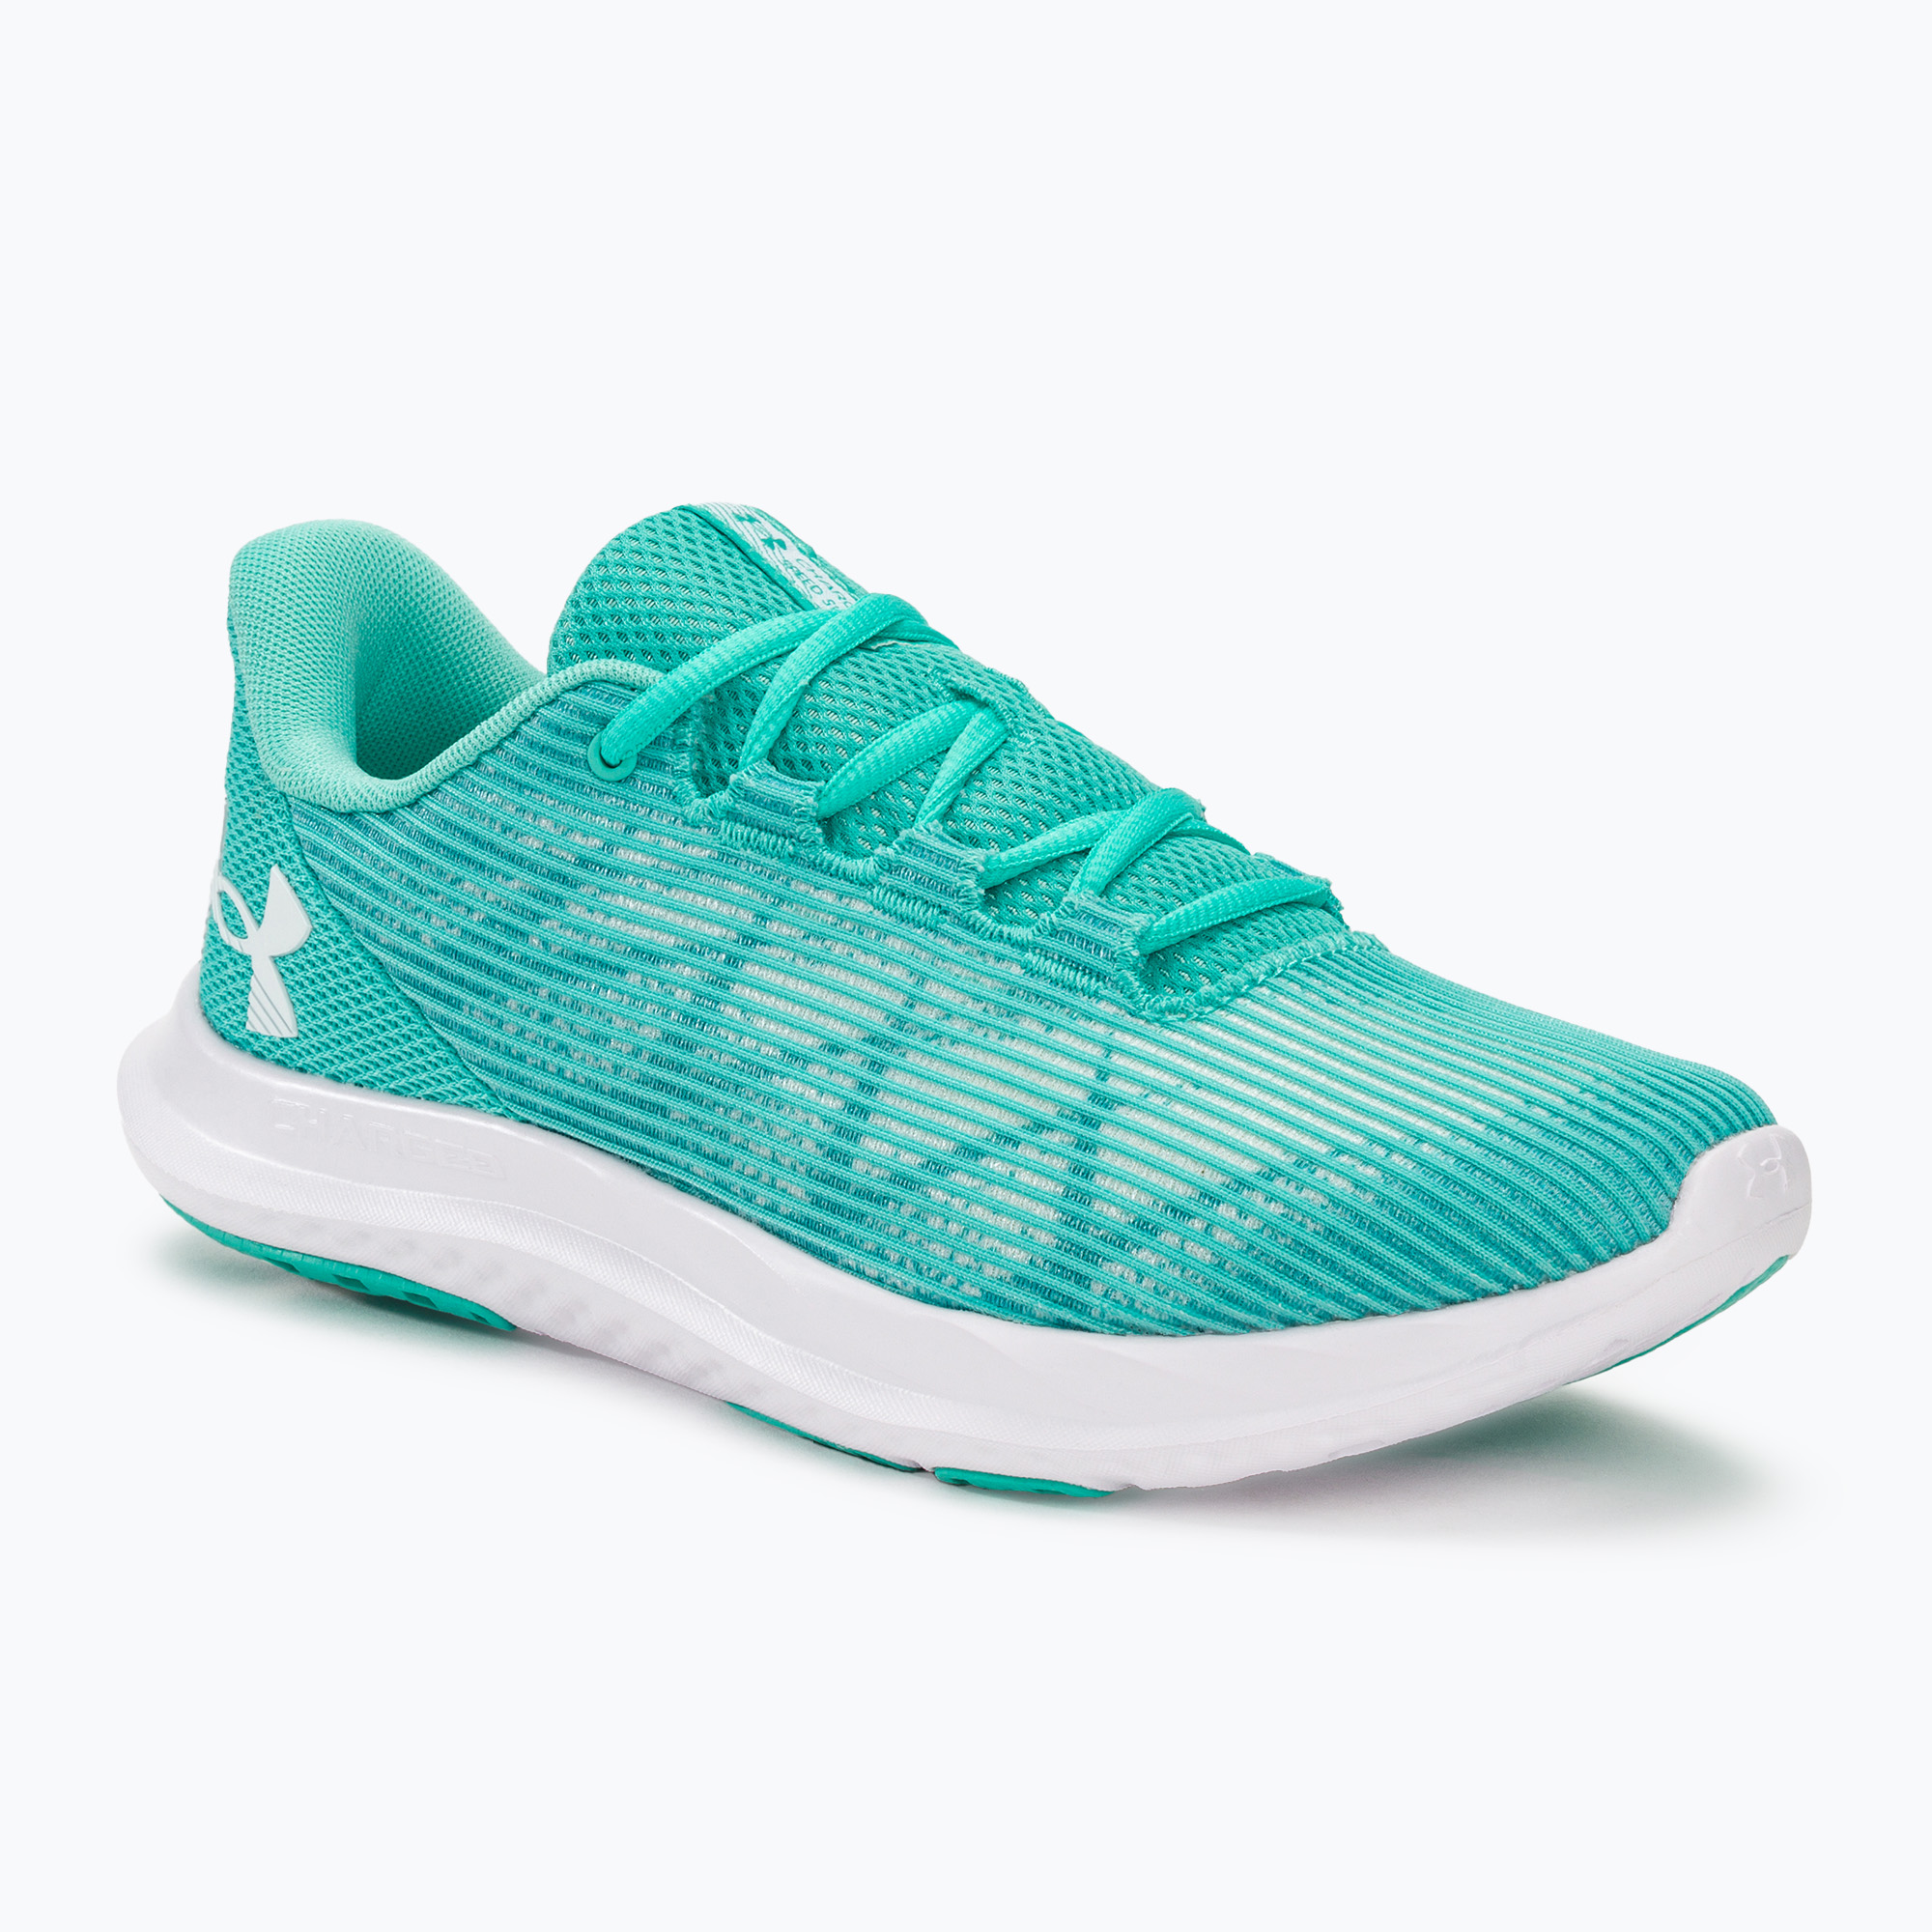 Under Armour Charged Speed Swift дамски обувки за бягане radial turquoise/circuit teal/white